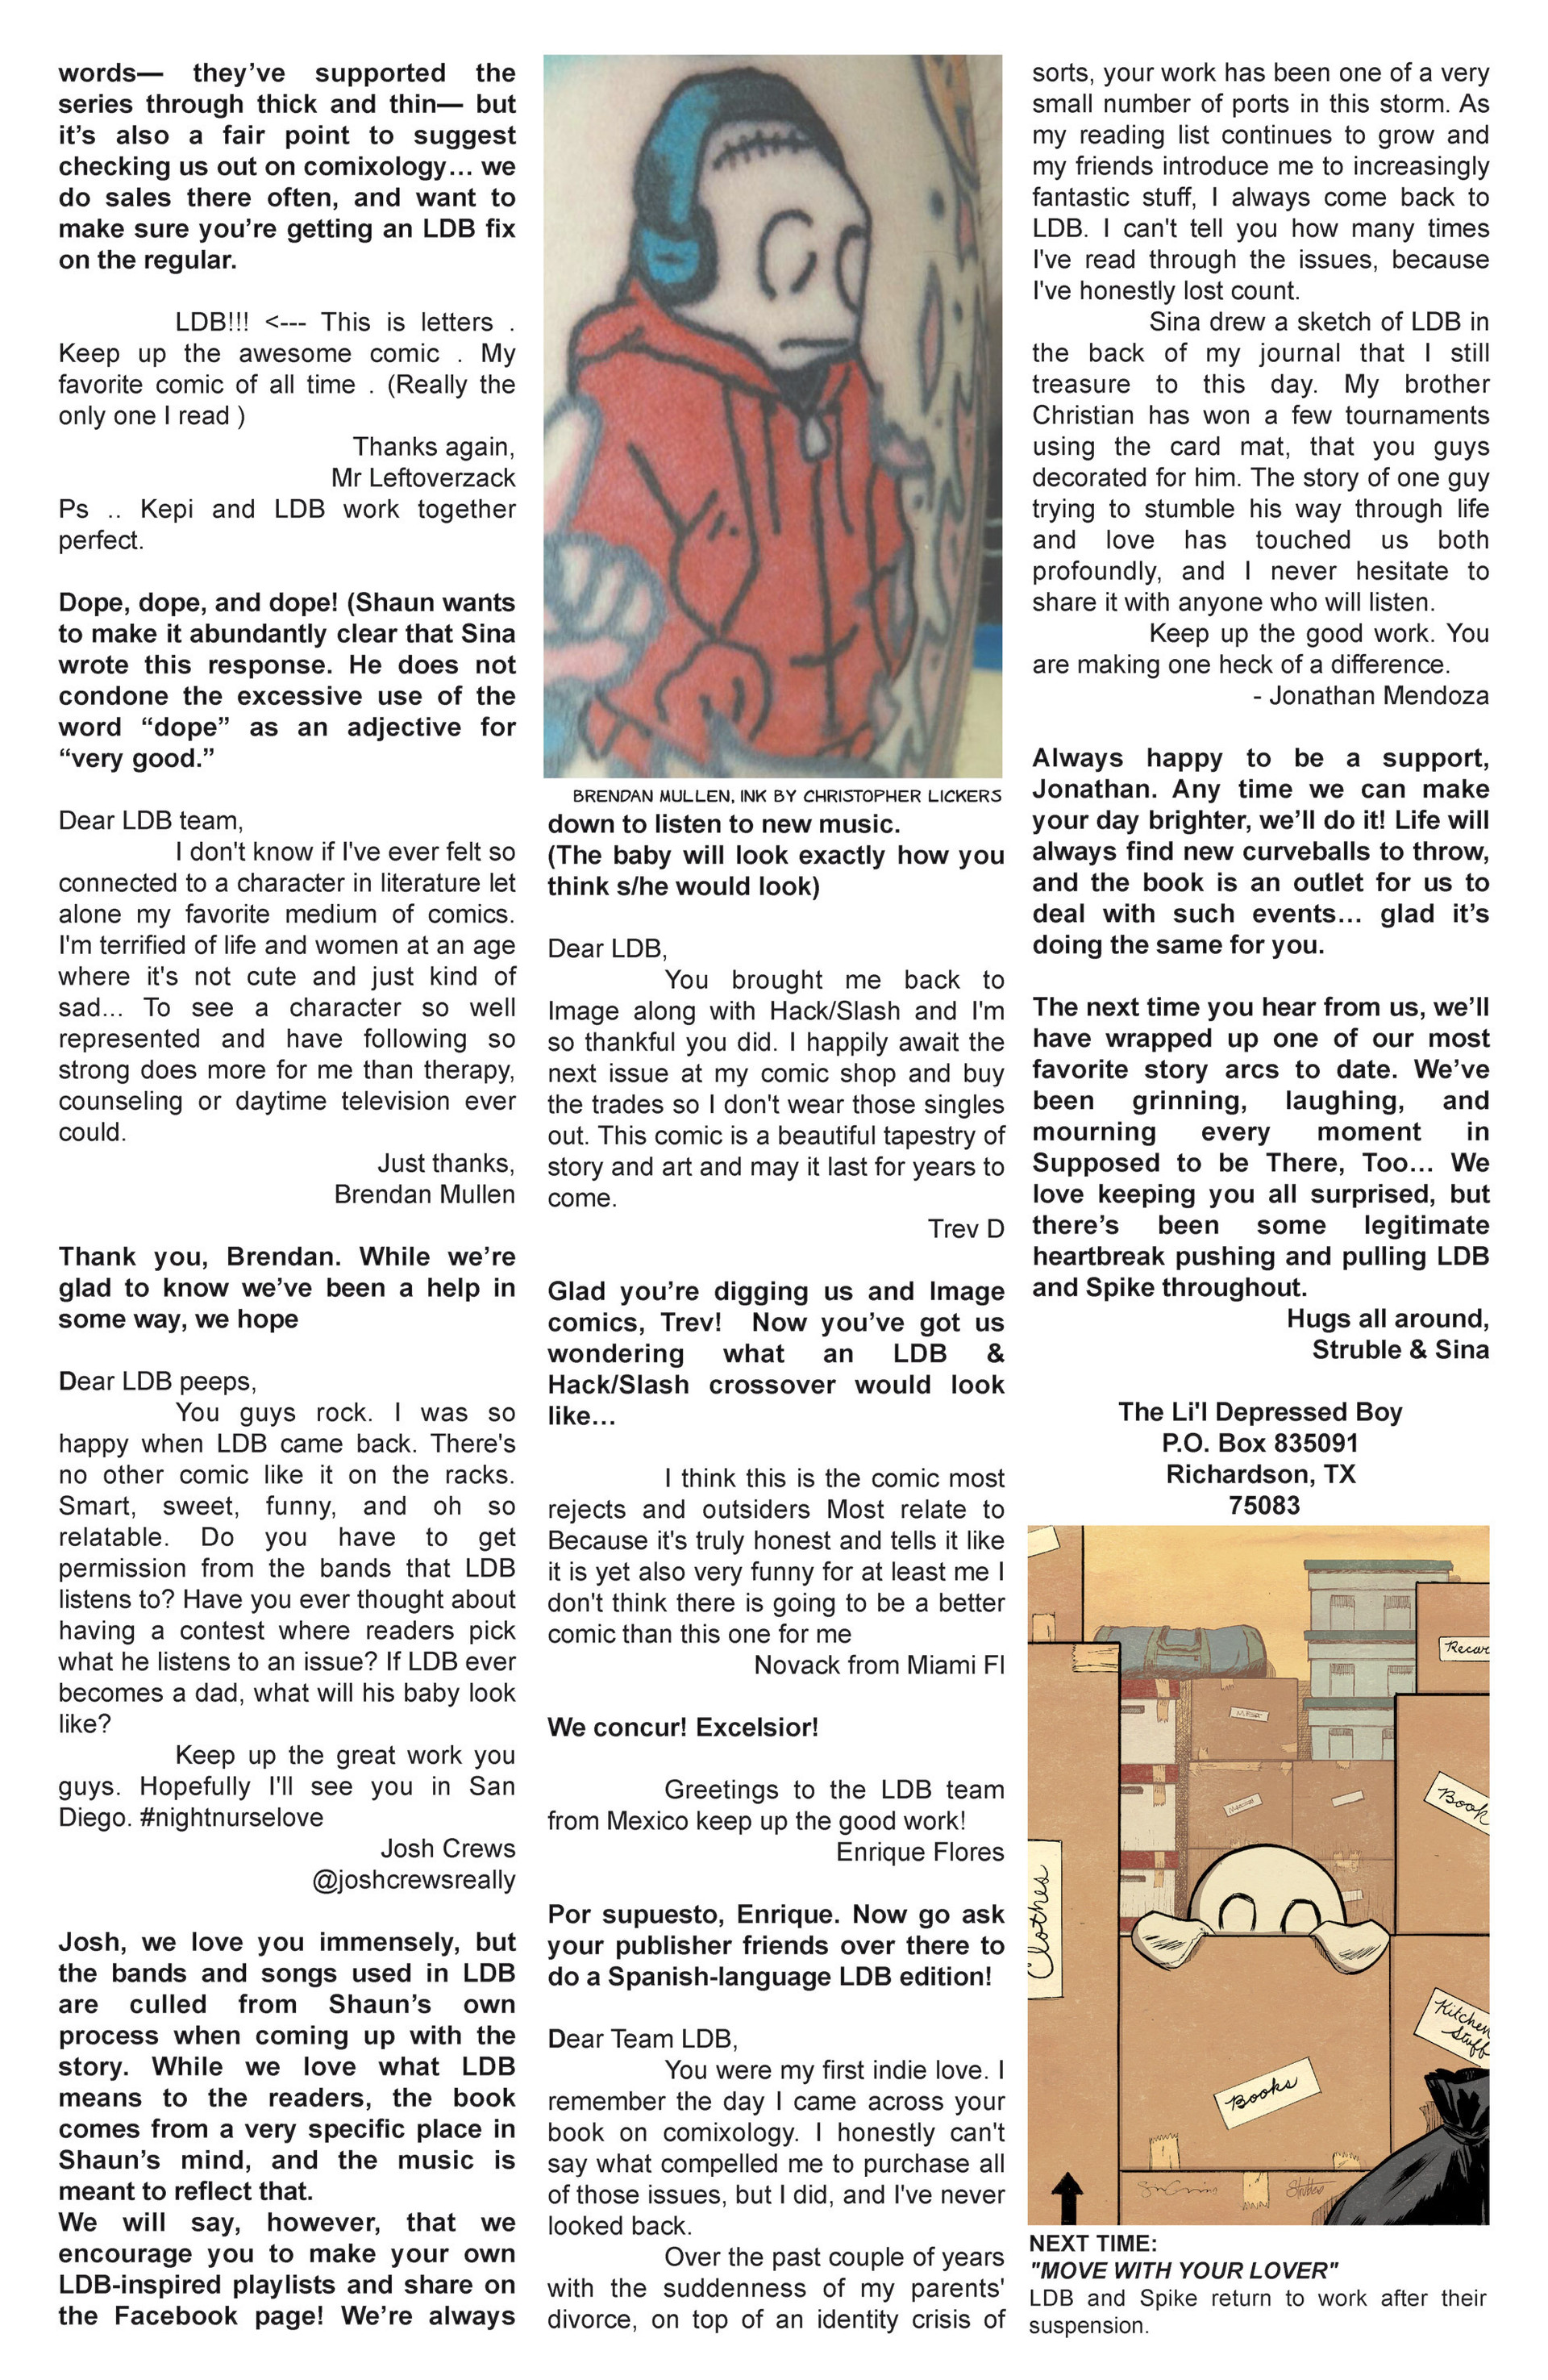 Read online The Li'l Depressed Boy: Supposed to Be There Too comic -  Issue #4 - 24